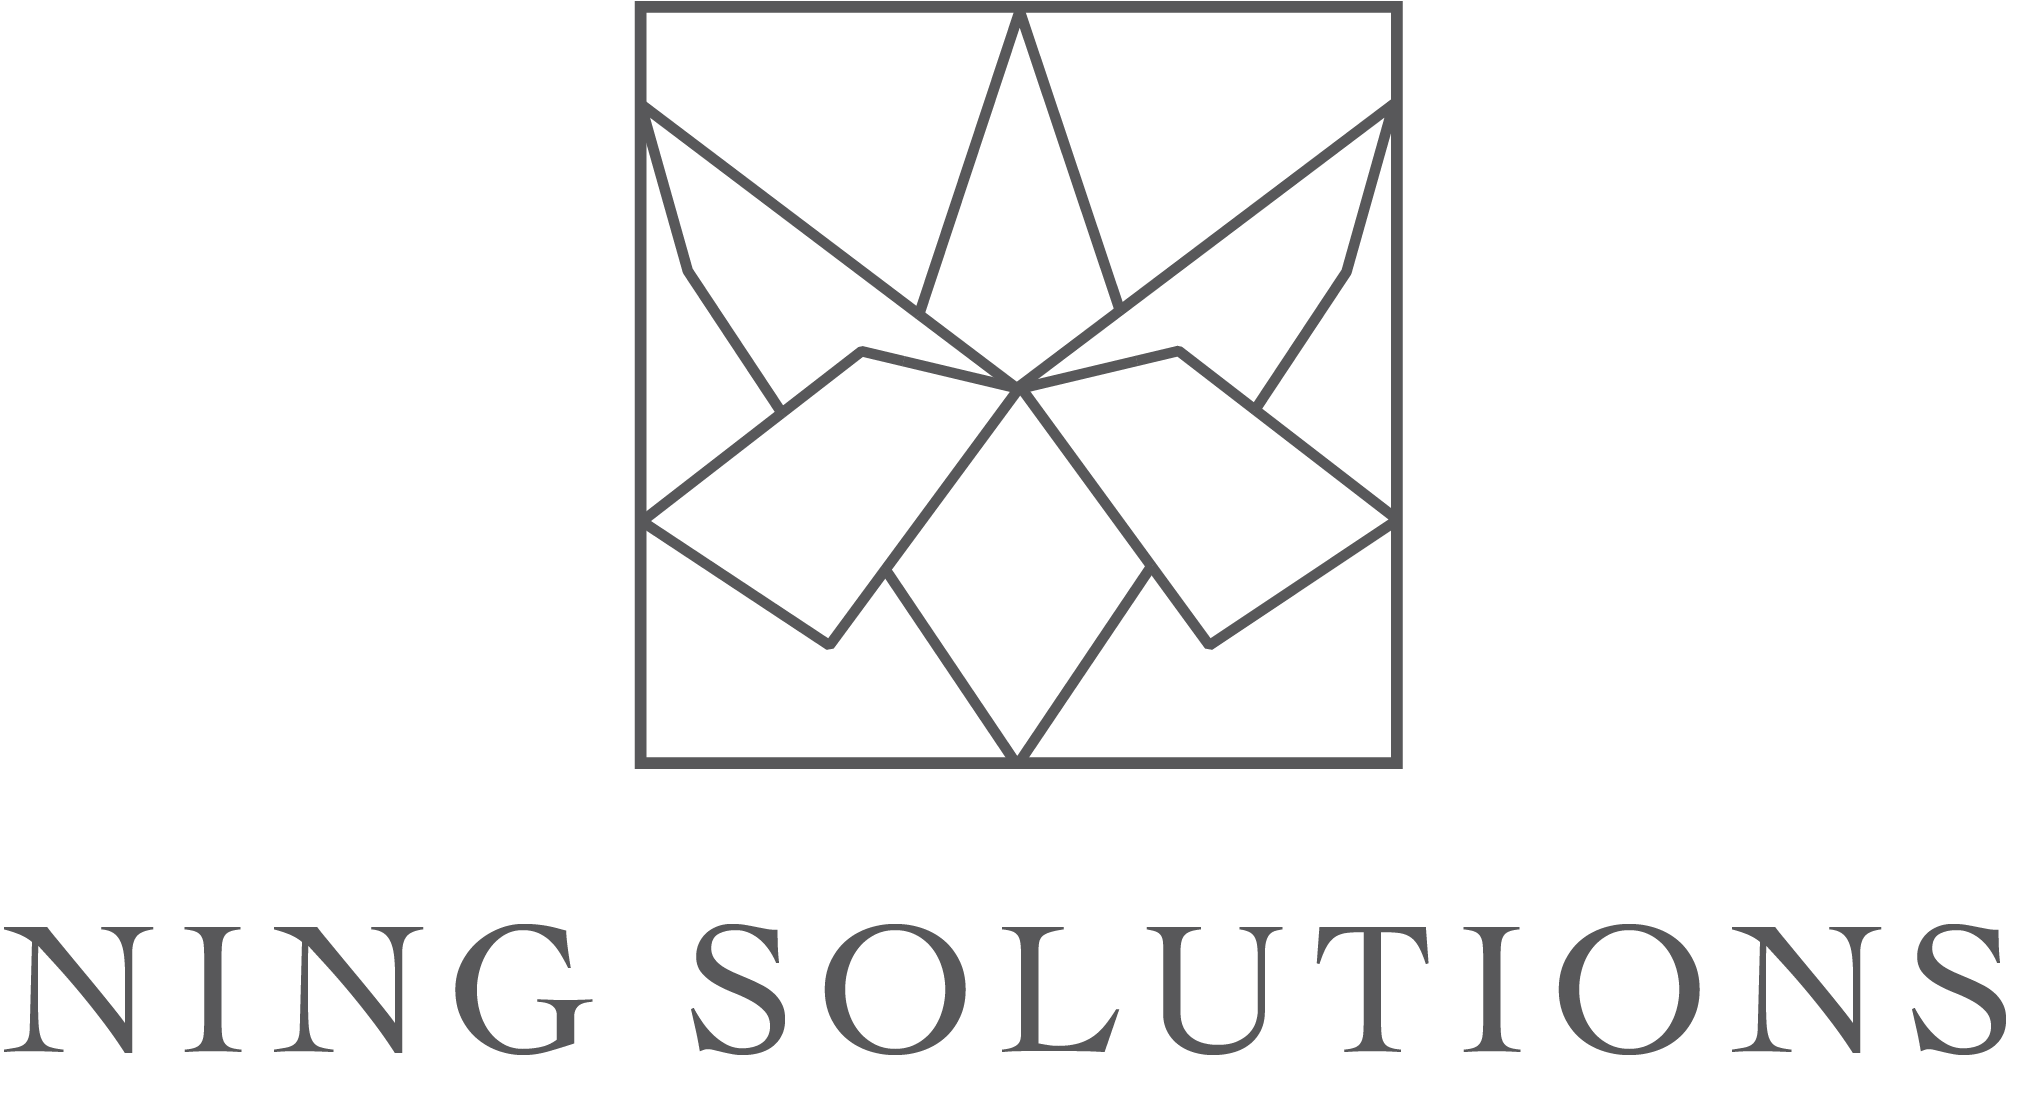 Ning Solutions